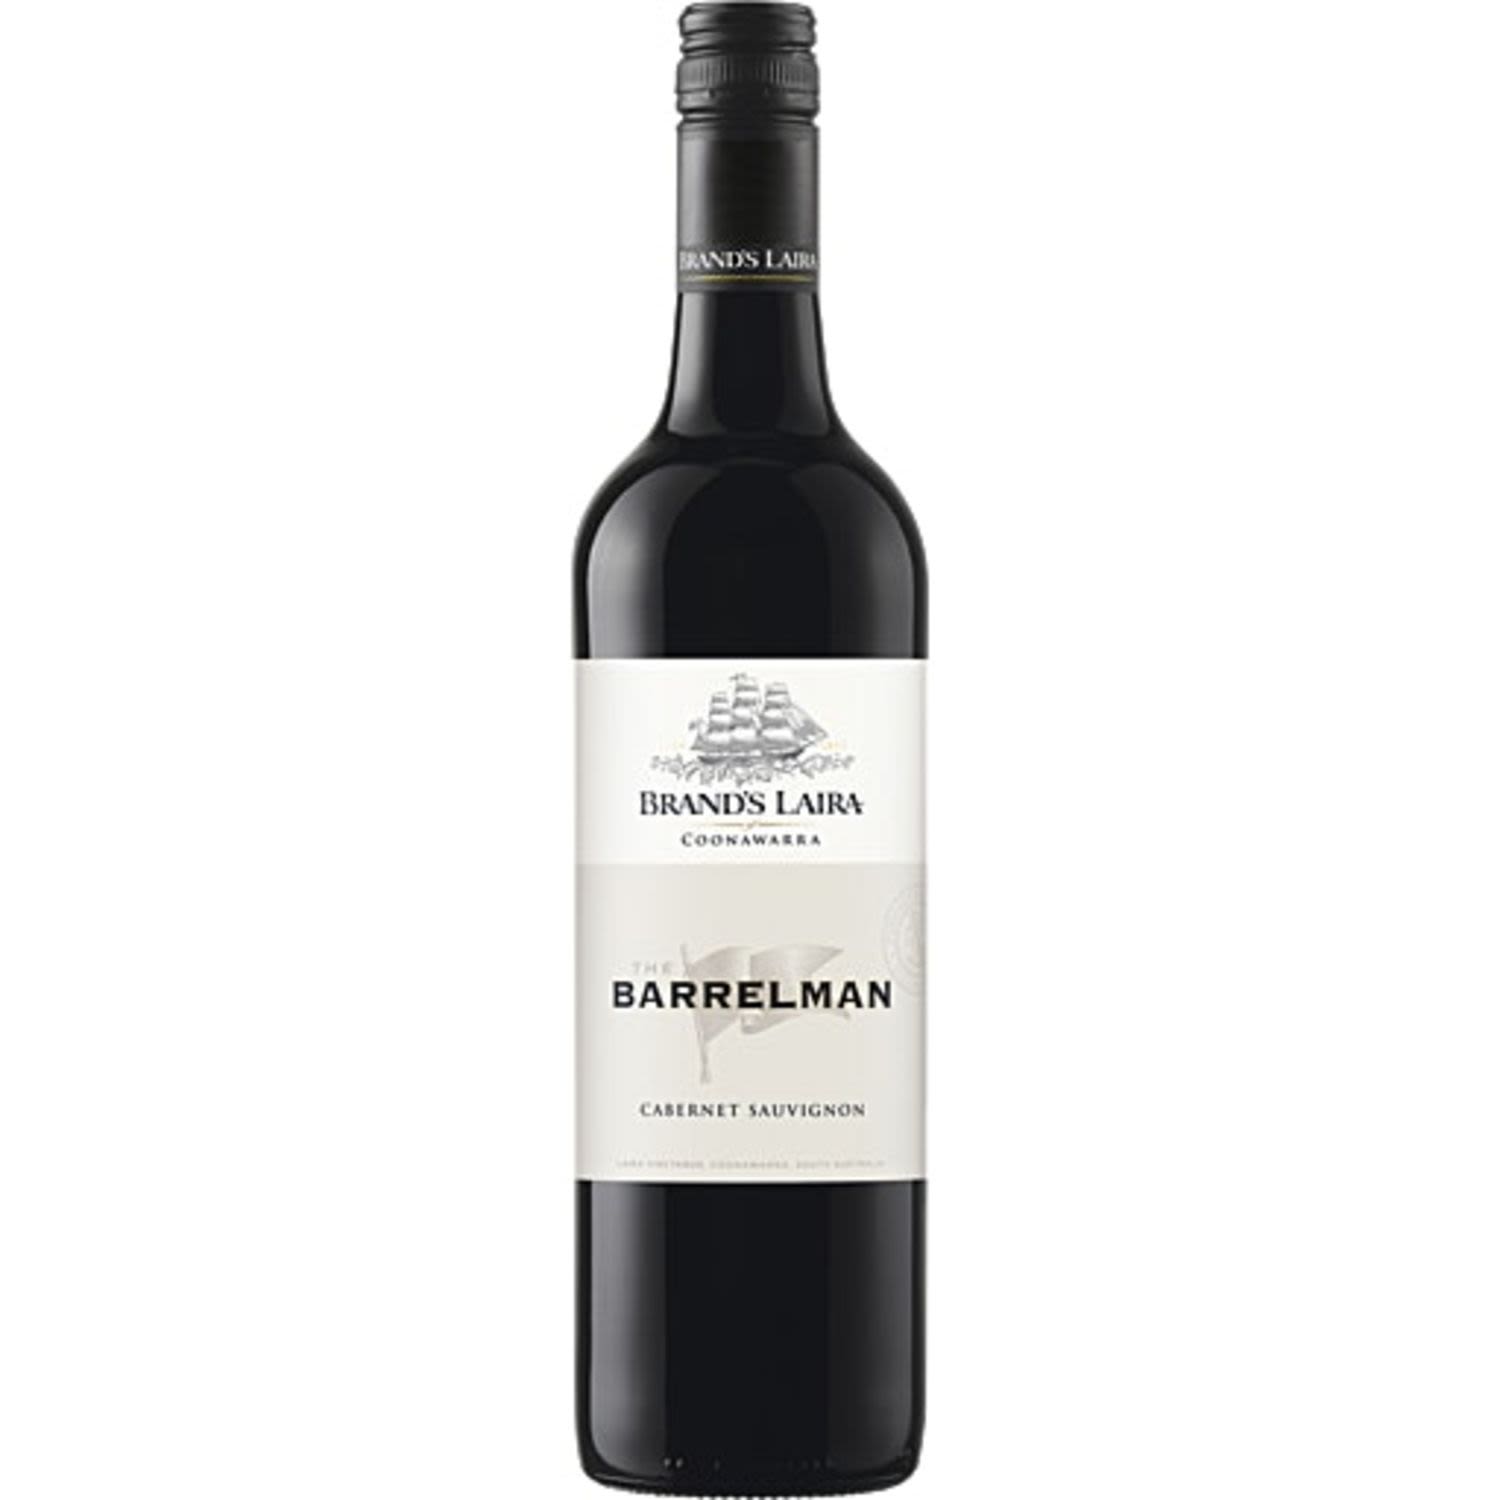 The palate is bursting with plush juicy dark berry fruits, supported by spicy nutty oak and a long smooth fine grained tannin finish<br /> <br />Alcohol Volume: 14.00%<br /><br />Pack Format: Bottle<br /><br />Standard Drinks: 8.3</br /><br />Pack Type: Bottle<br /><br />Country of Origin: Australia<br /><br />Region: Coonawarra<br /><br />Vintage: '2016<br />